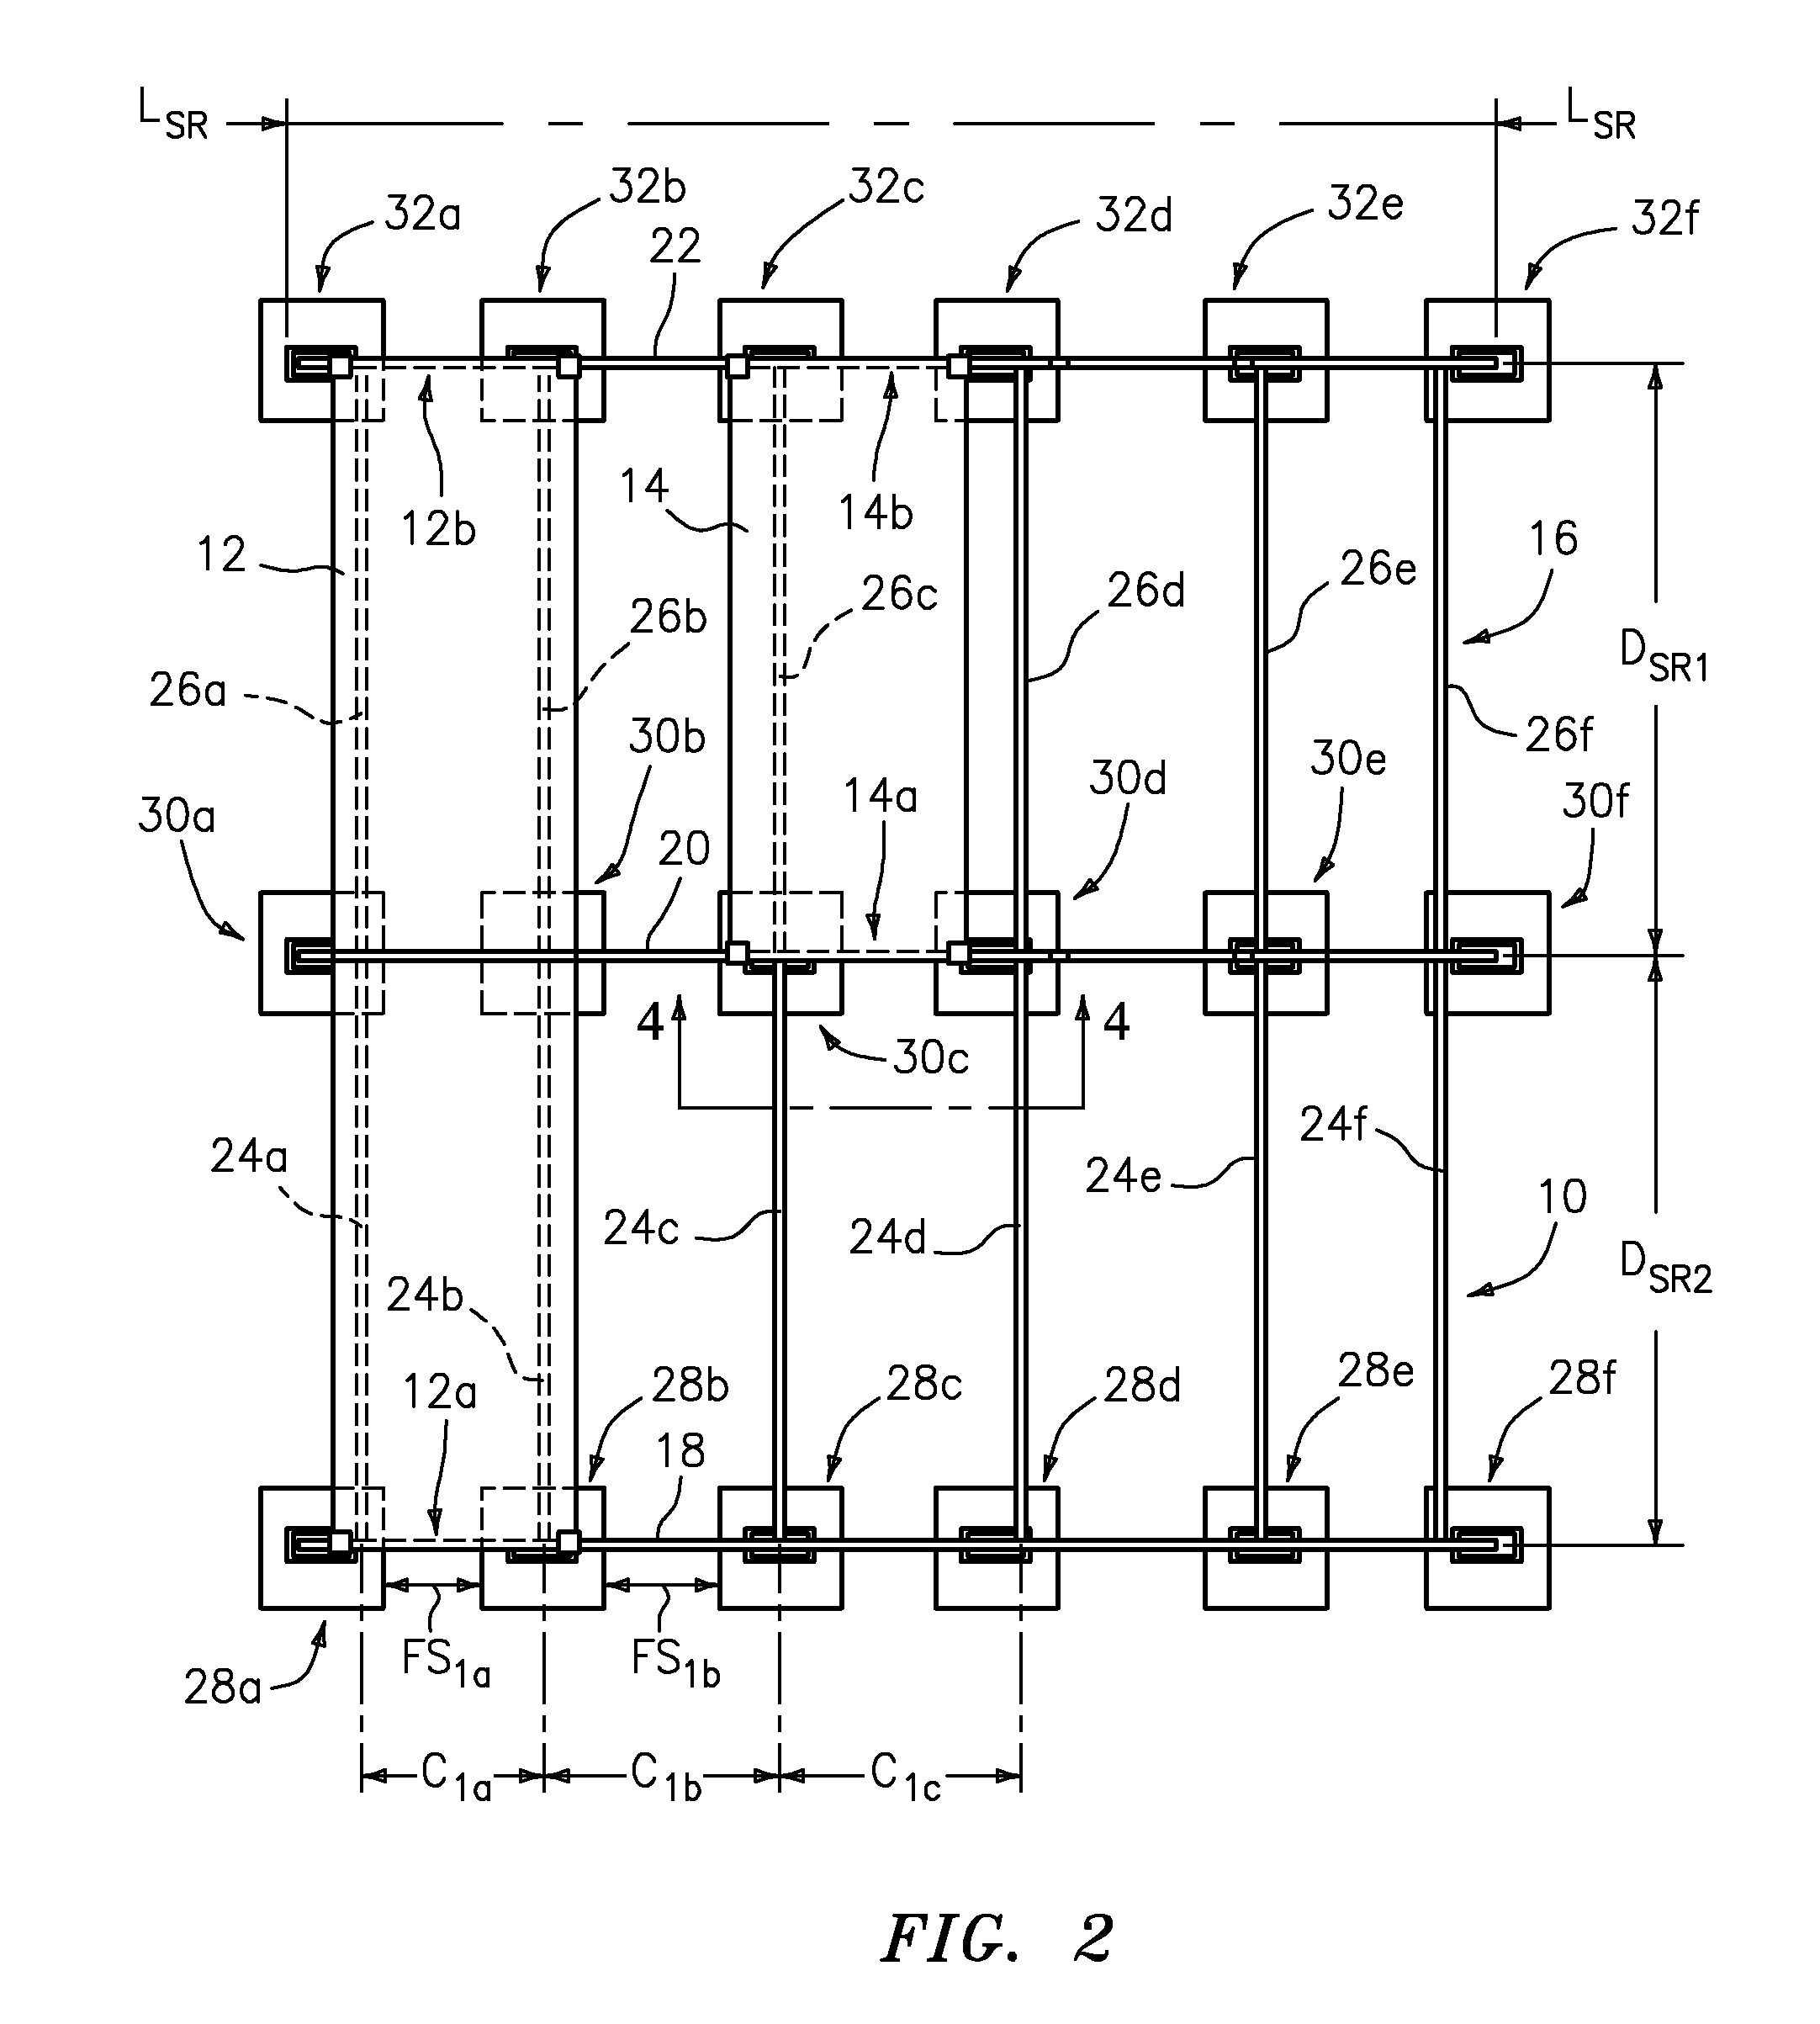 Frames for supporting service cells